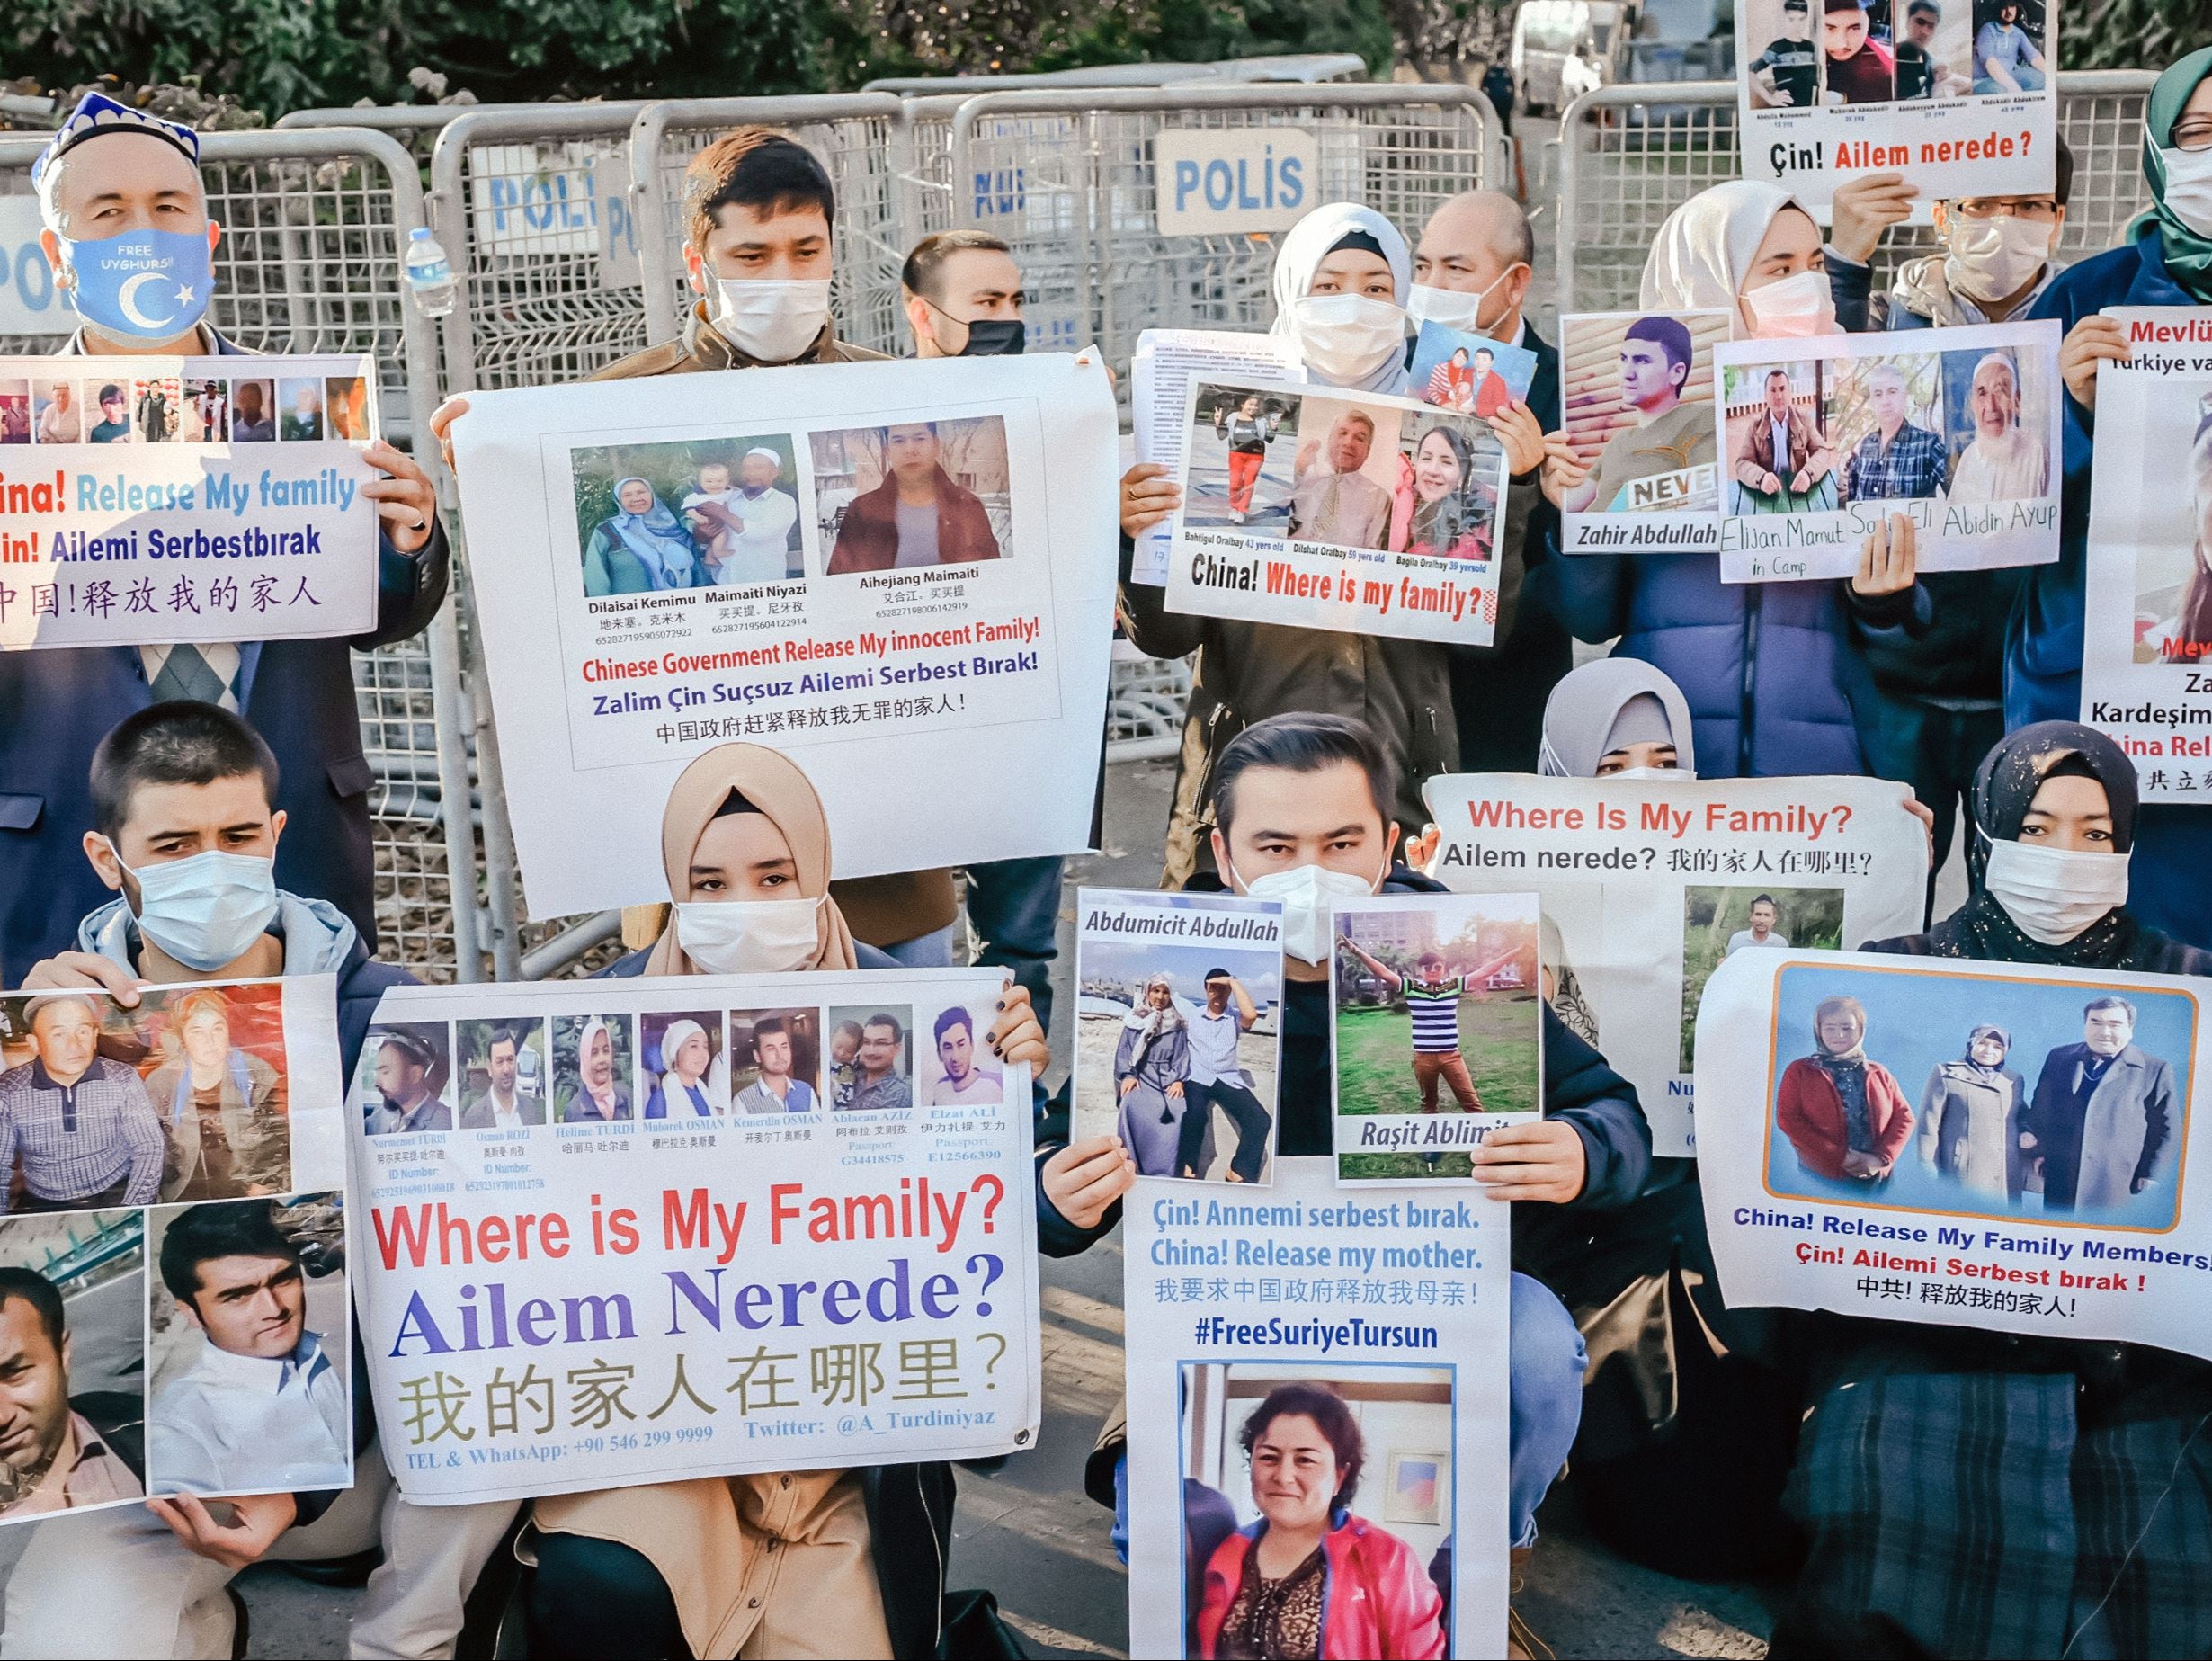 Members of the Muslim Uighur minority hold placards as they demonstrate in front of the Chinese consulate in Istanbul